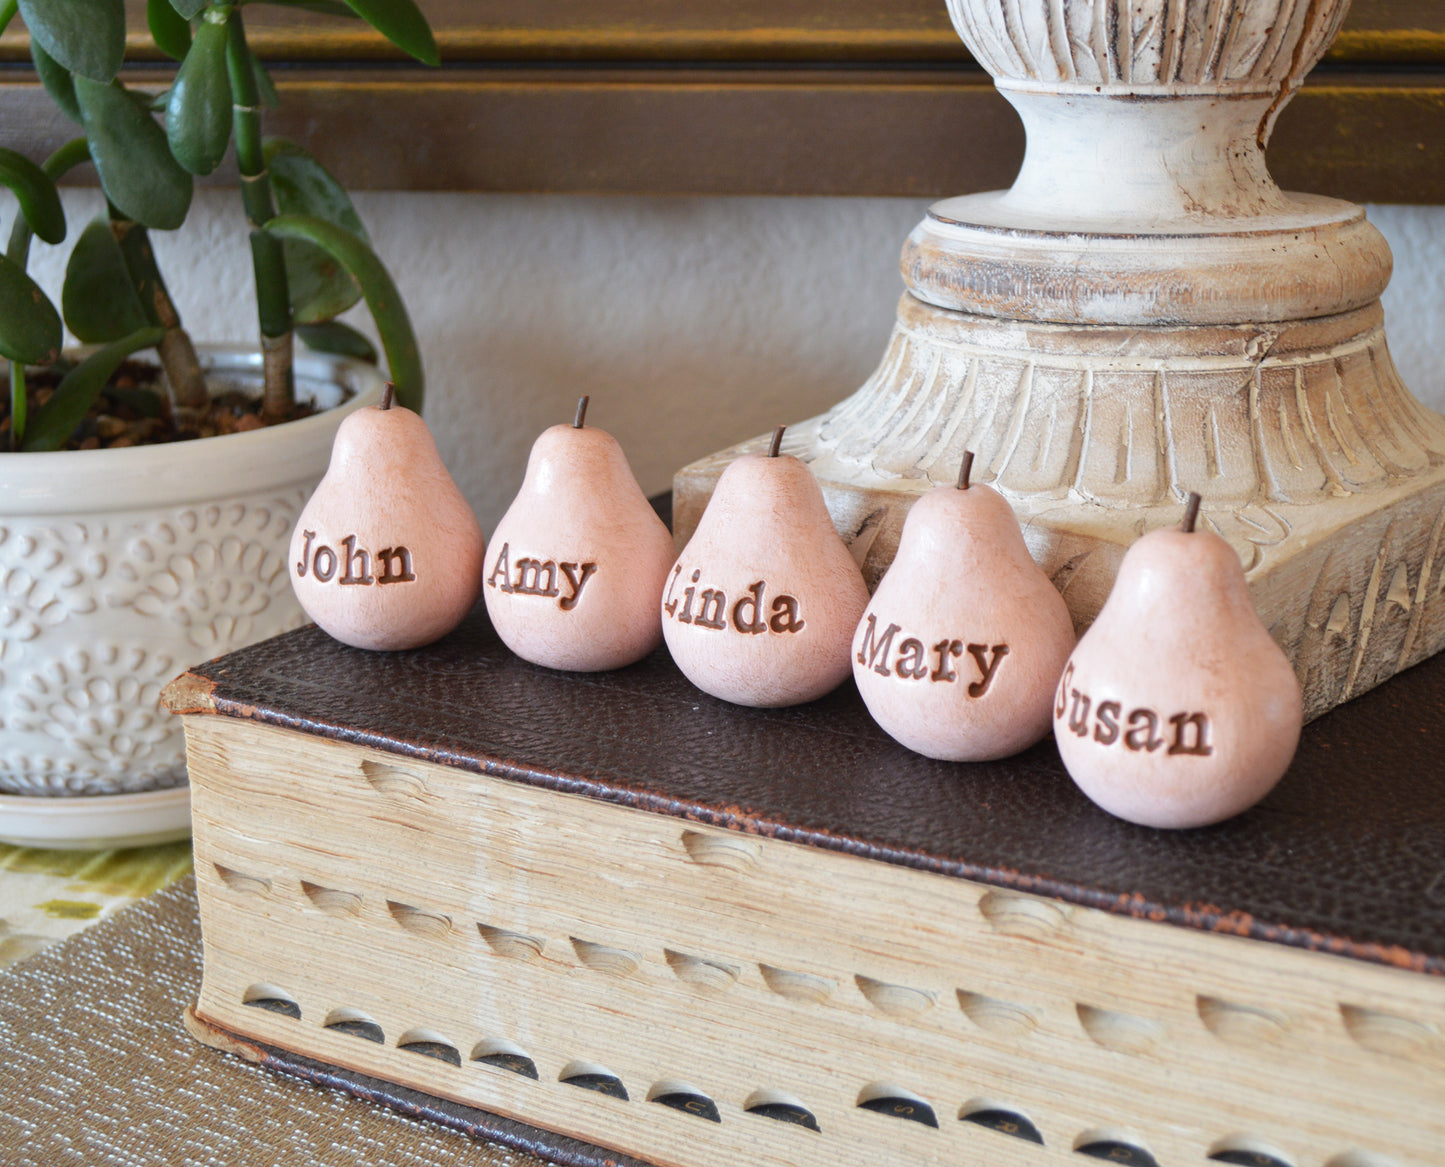 Custom worded vintage pink pears / Any words you want / FREE SHIPPING